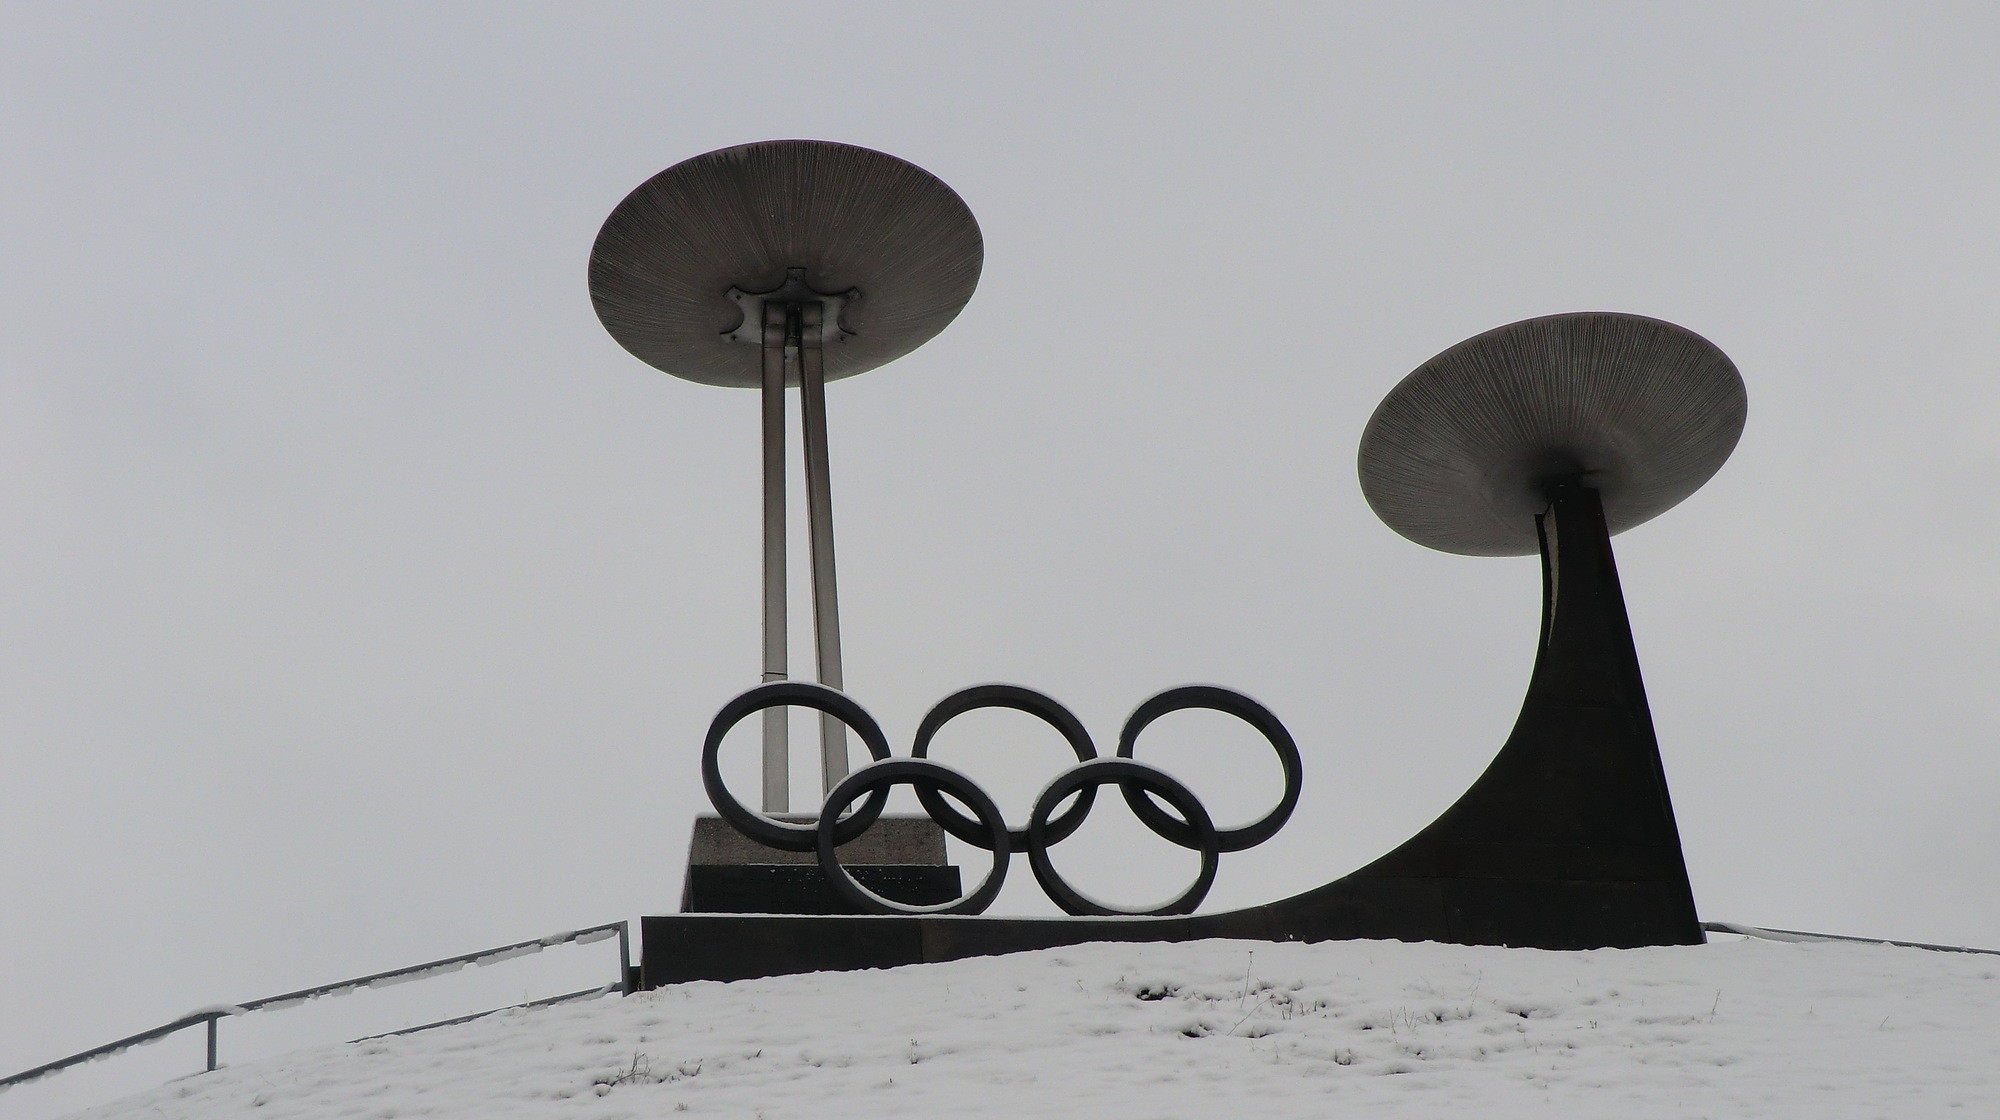 The Olympic cauldrons for 1964 and 1976 at Innsbruck ©Philip Barker